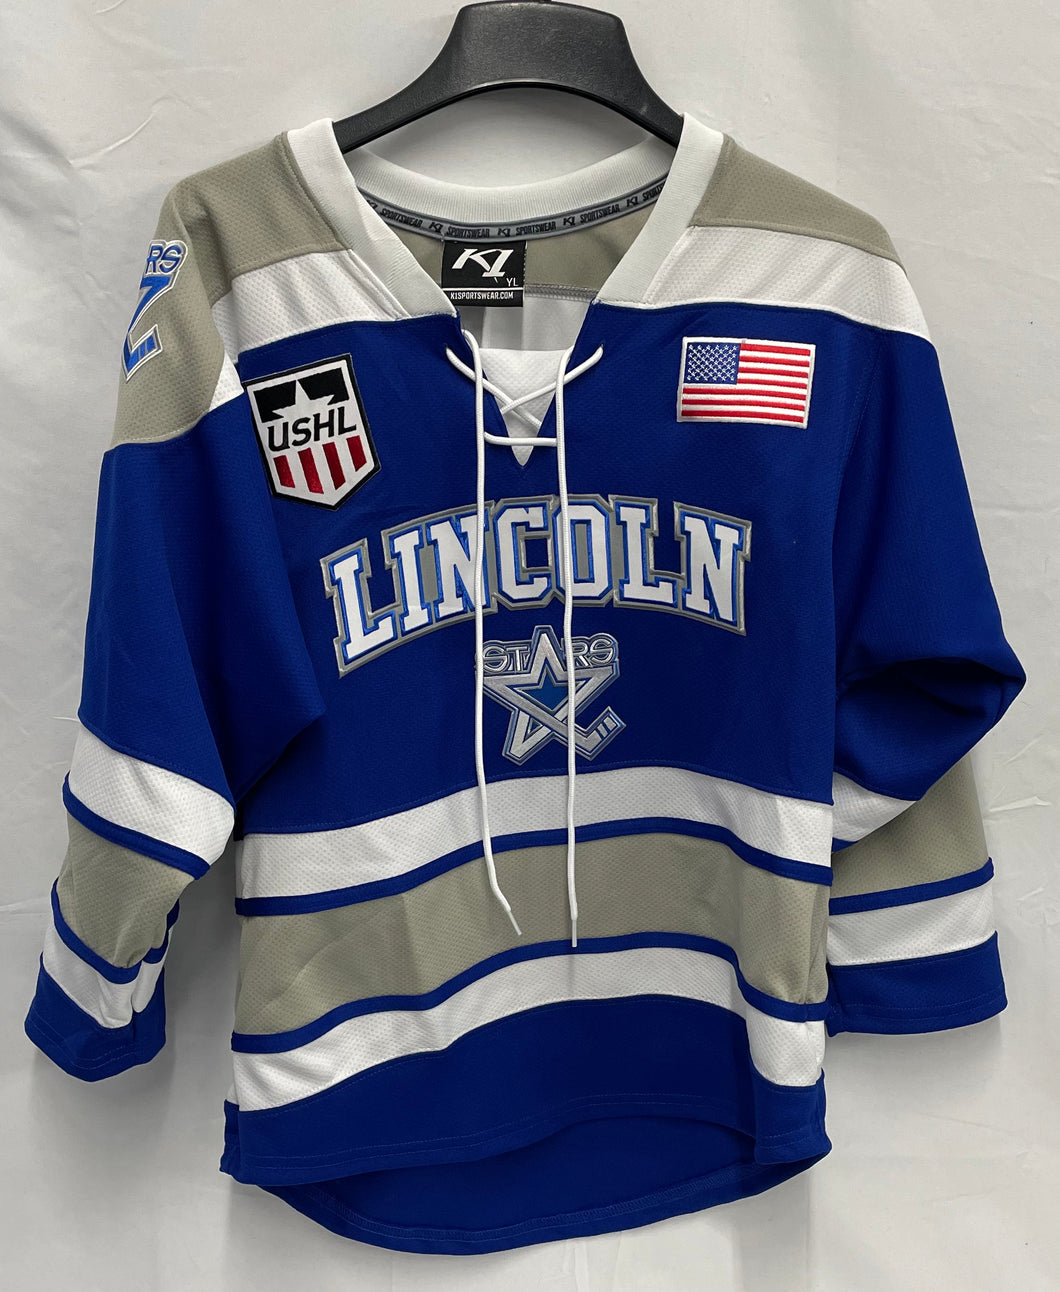 22-23 Youth Blue/White Lace Alternate Jersey